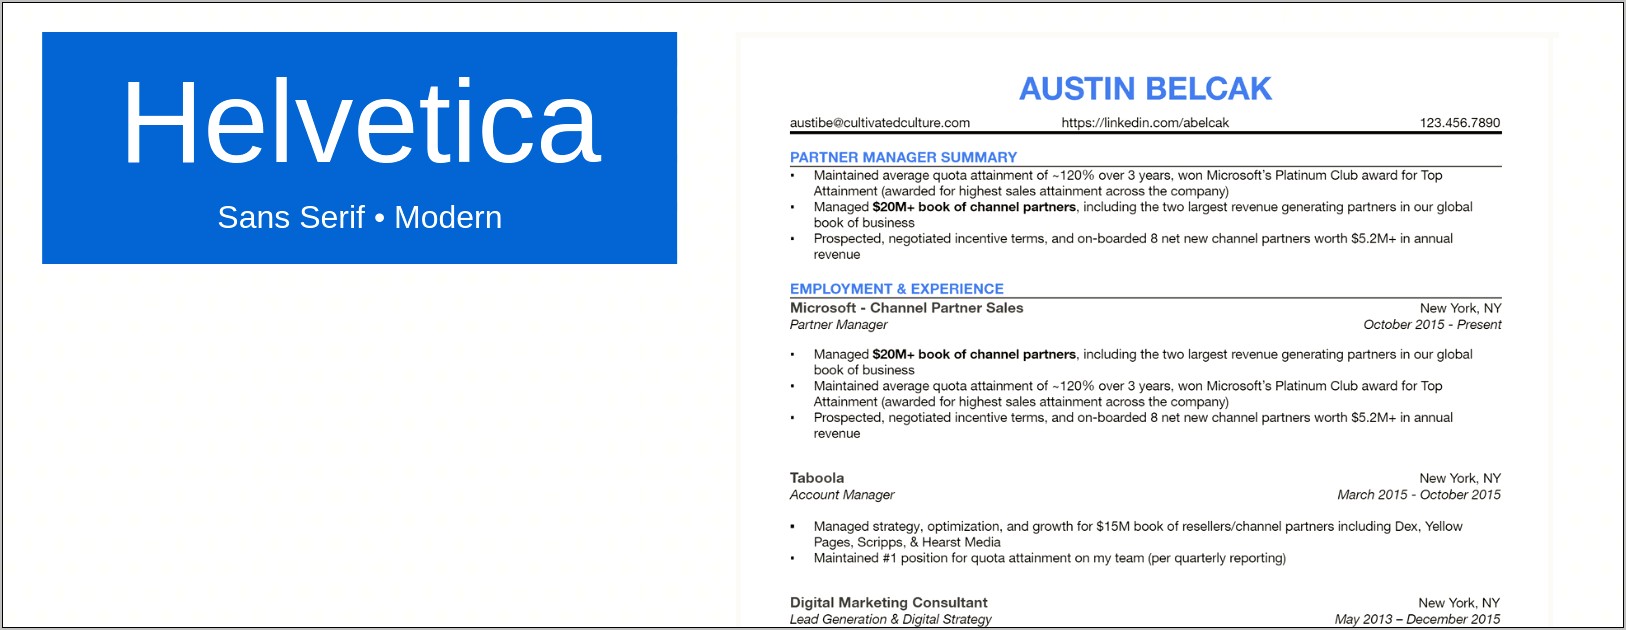 Best Fonts For Software Resumes